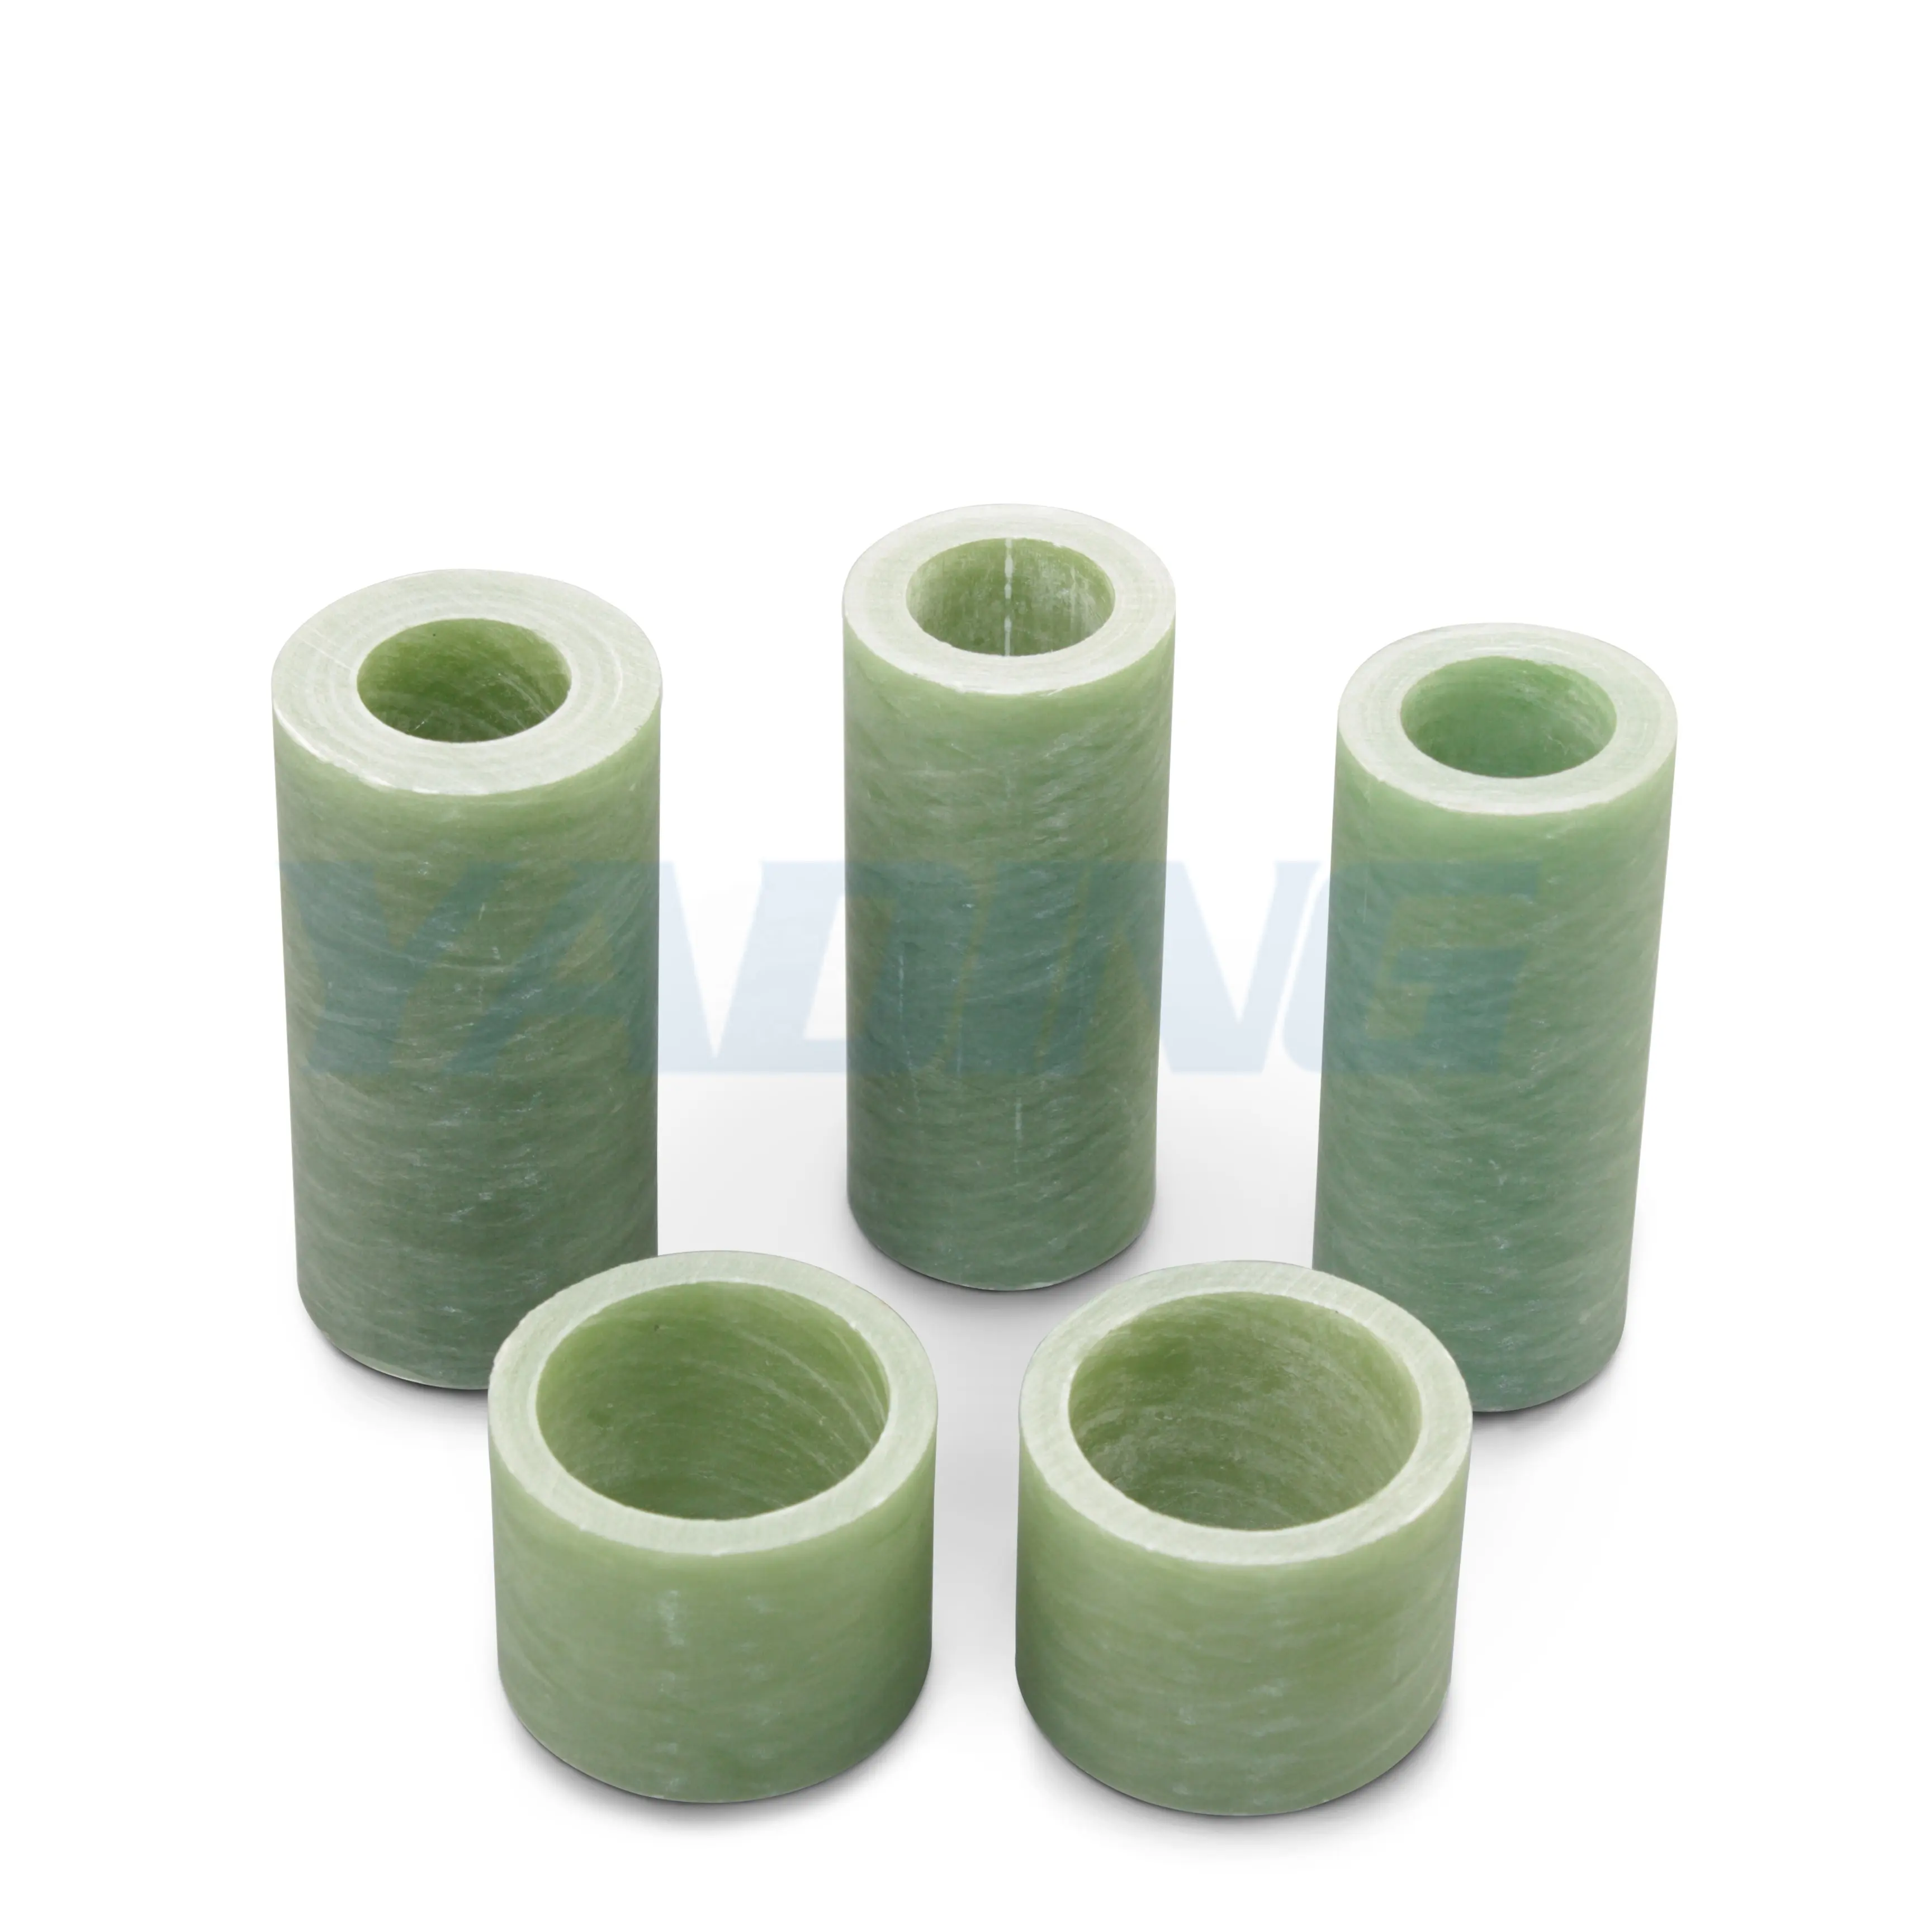 Insulating Material FR4 Composite Epoxy Tube